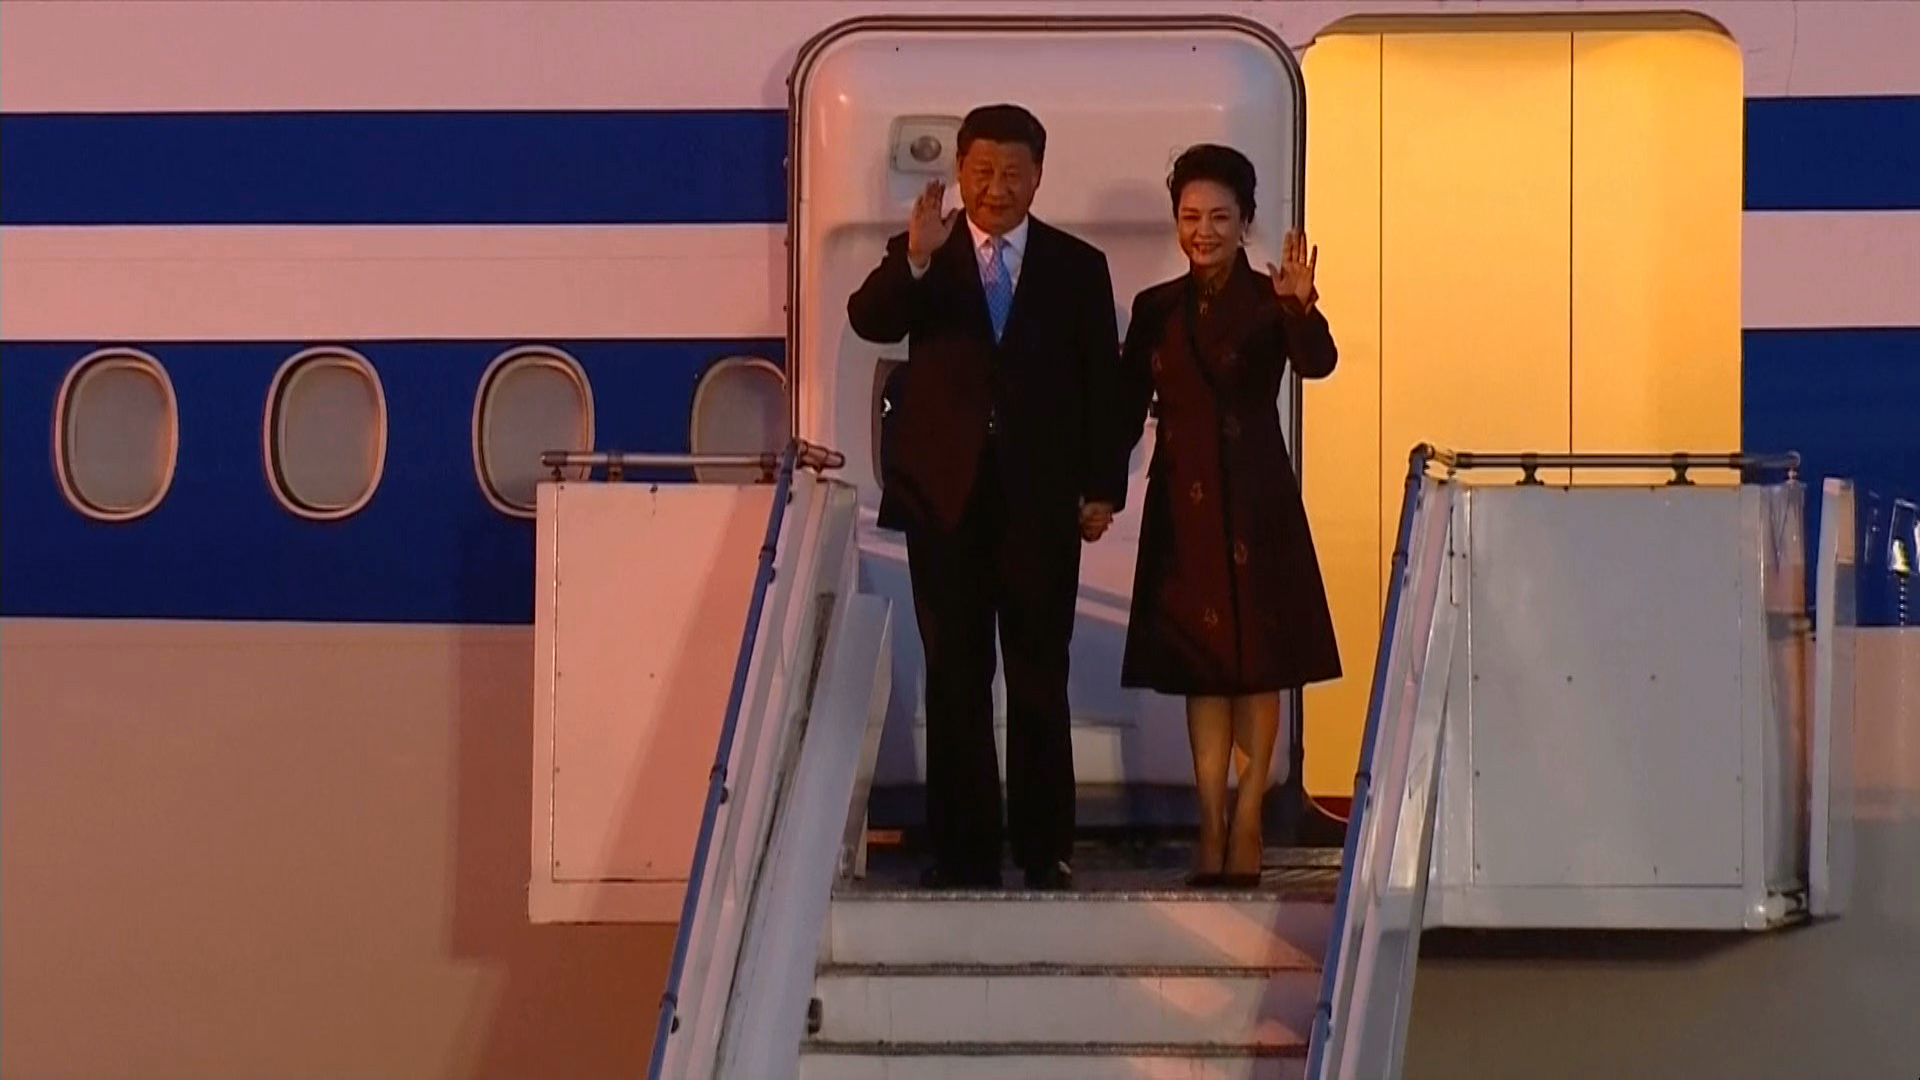 G20 underway as Xi Jinping and other world leaders arrive